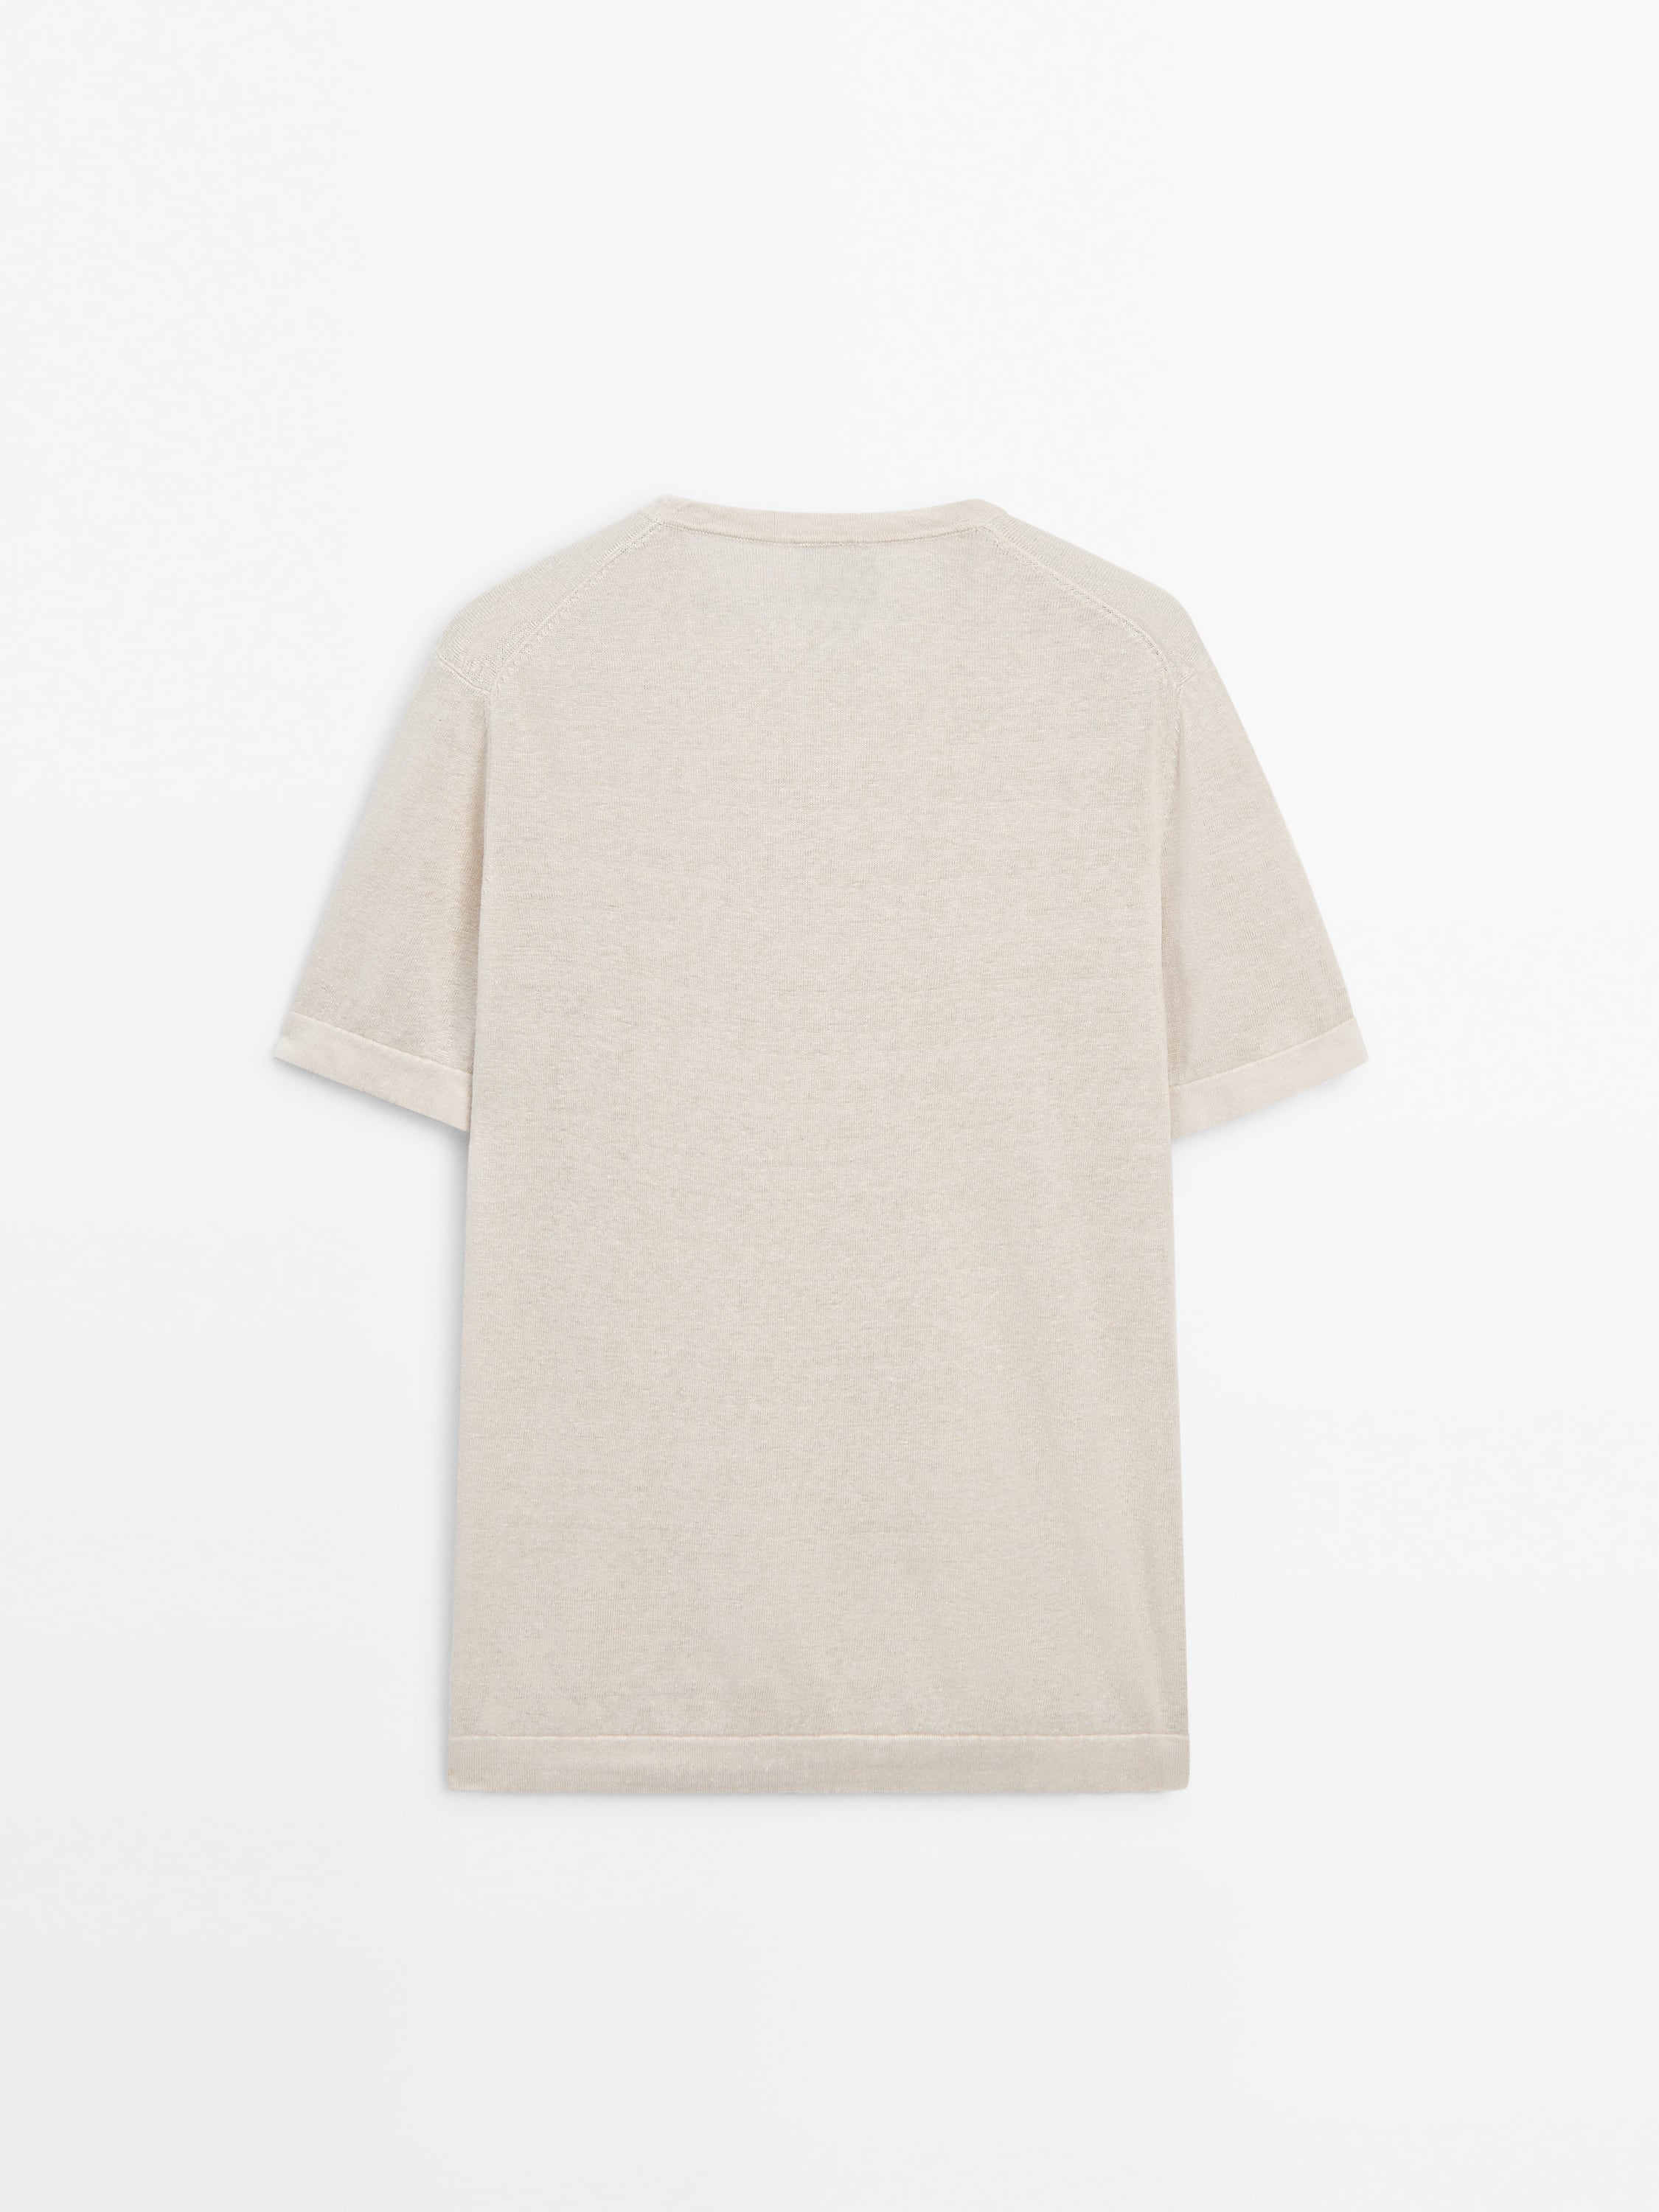 Knit short sleeve linen sweater - Limited Edition